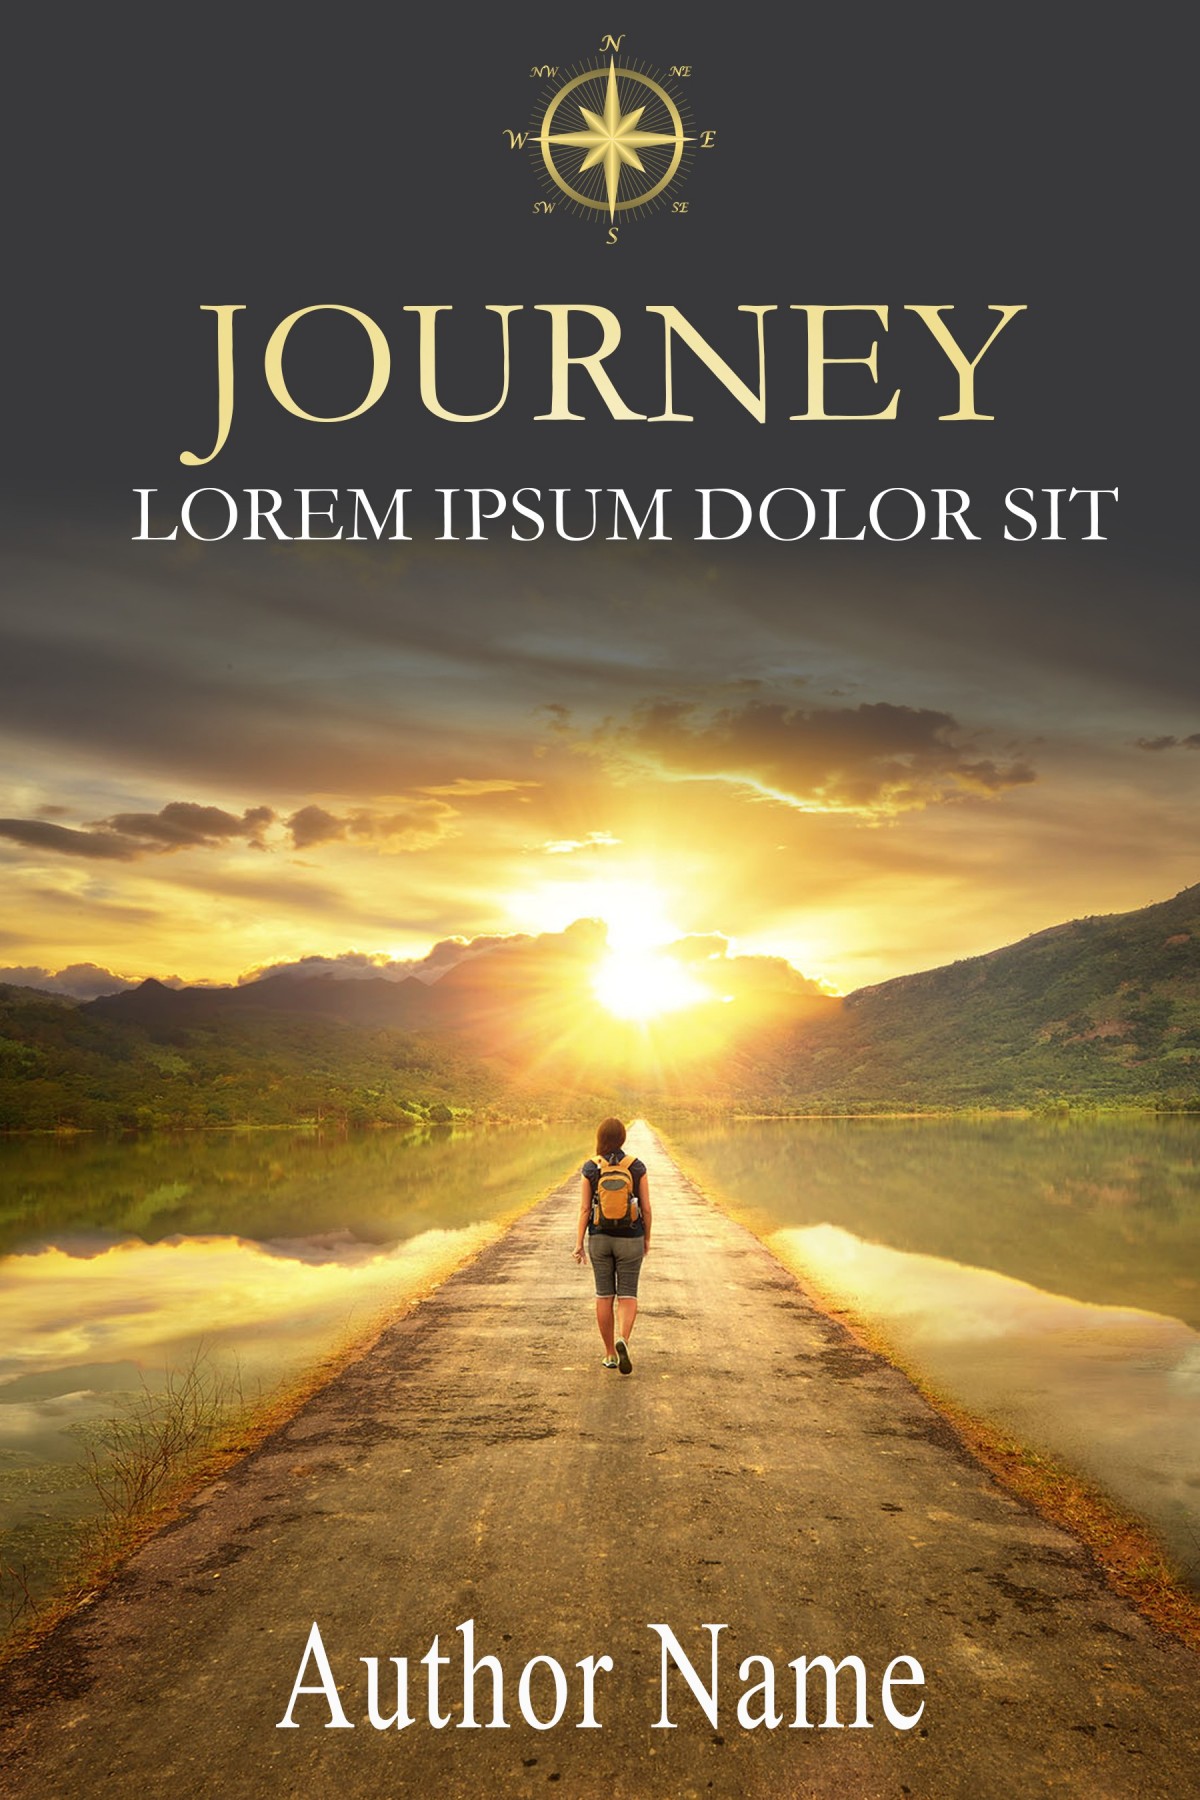 journey book covers